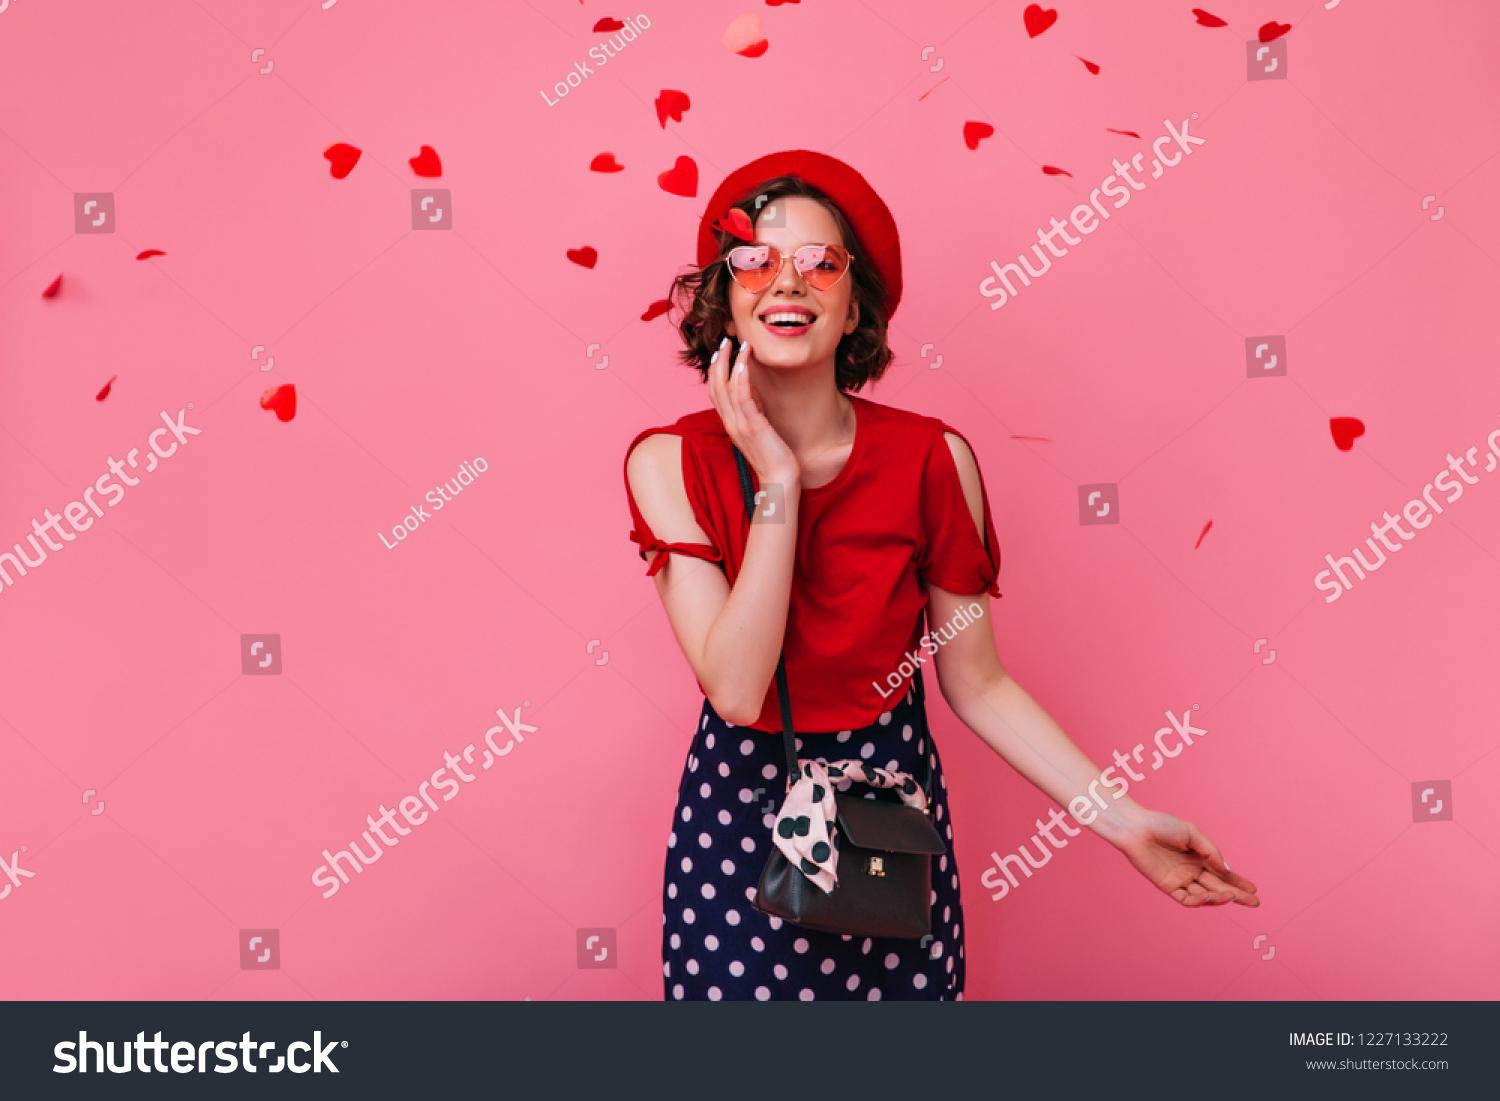 Romantic white woman with brown hair expressing happiness in valentine's day. Enchanting stylish girl in funny glasses posing on rosy background with confetti. #1227133222